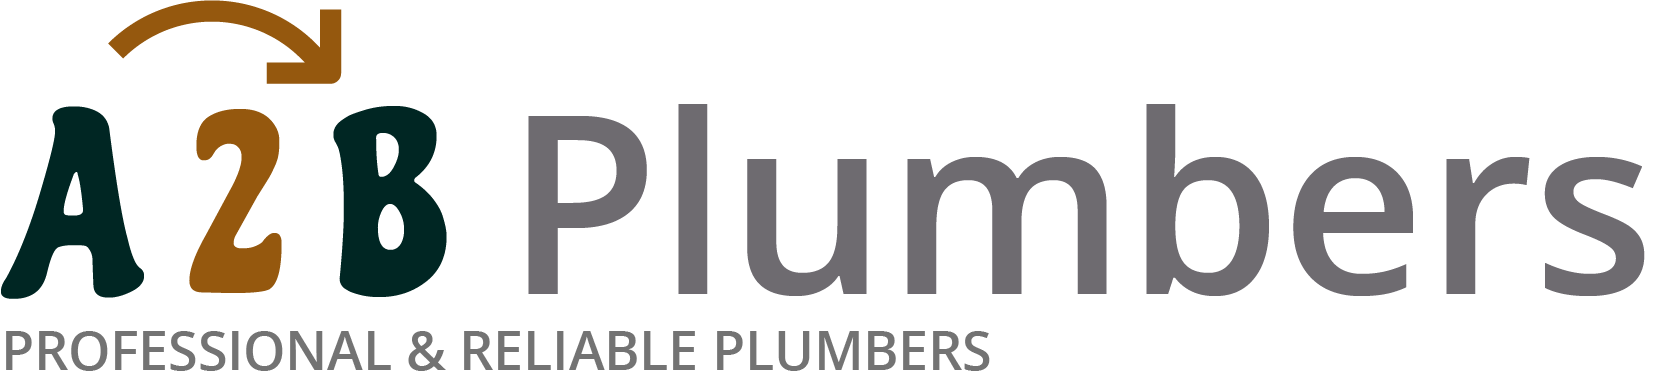 If you need a boiler installed, a radiator repaired or a leaking tap fixed, call us now - we provide services for properties in Potters Bar and the local area.